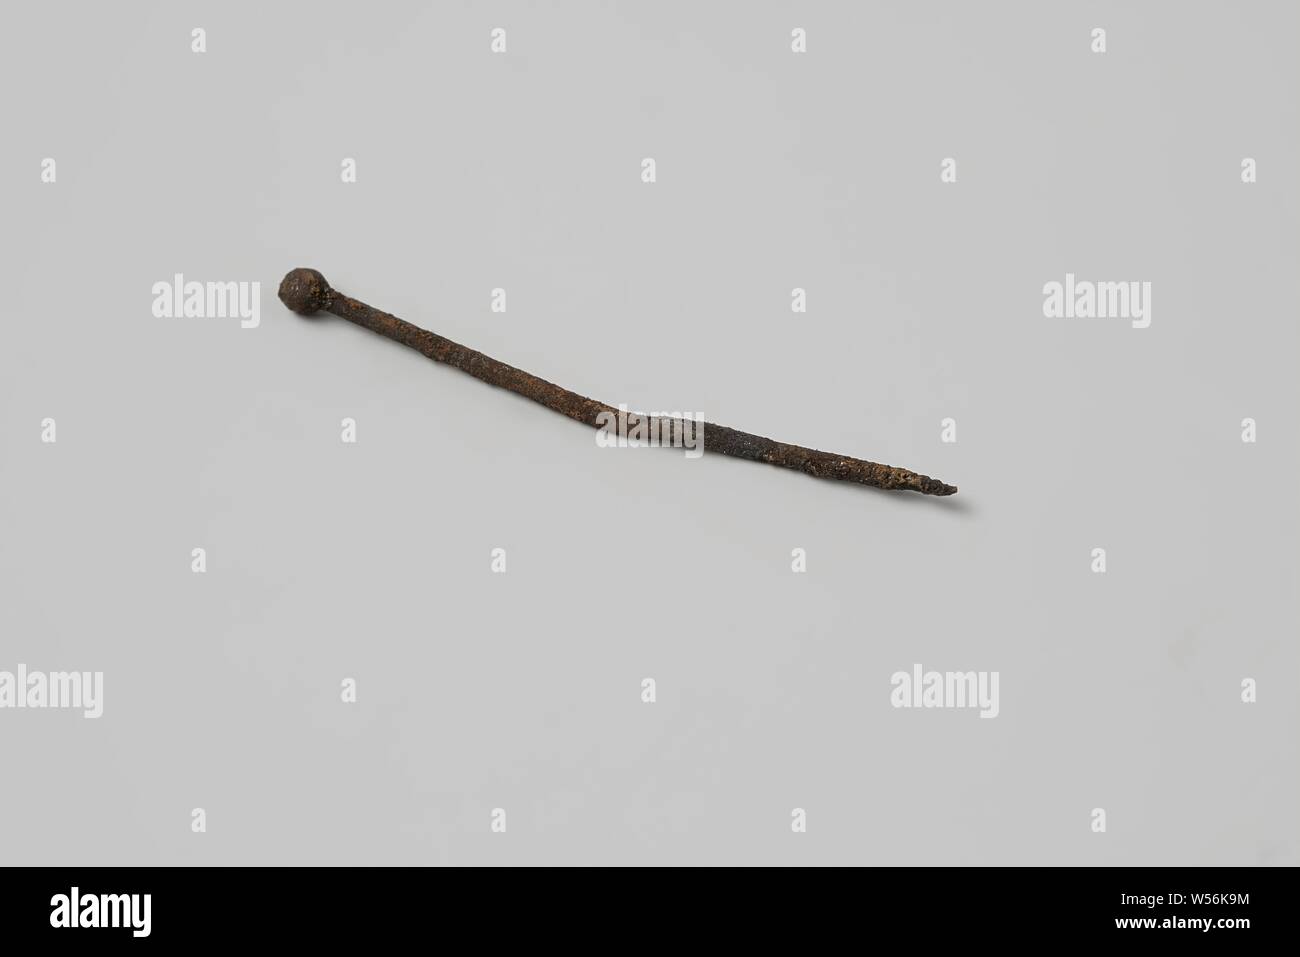 Pin from the wreck of the East Indies ship Hollandia, Pin, tools and instruments, sewing and sailmaking, pin, Annet, Dutch East India Company, Hollandia (ship), anonymous, Netherlands, 1700 - in or before 13-Aug-1743, copper (metal), h 2.5 cm × d 0.1 cm Stock Photo